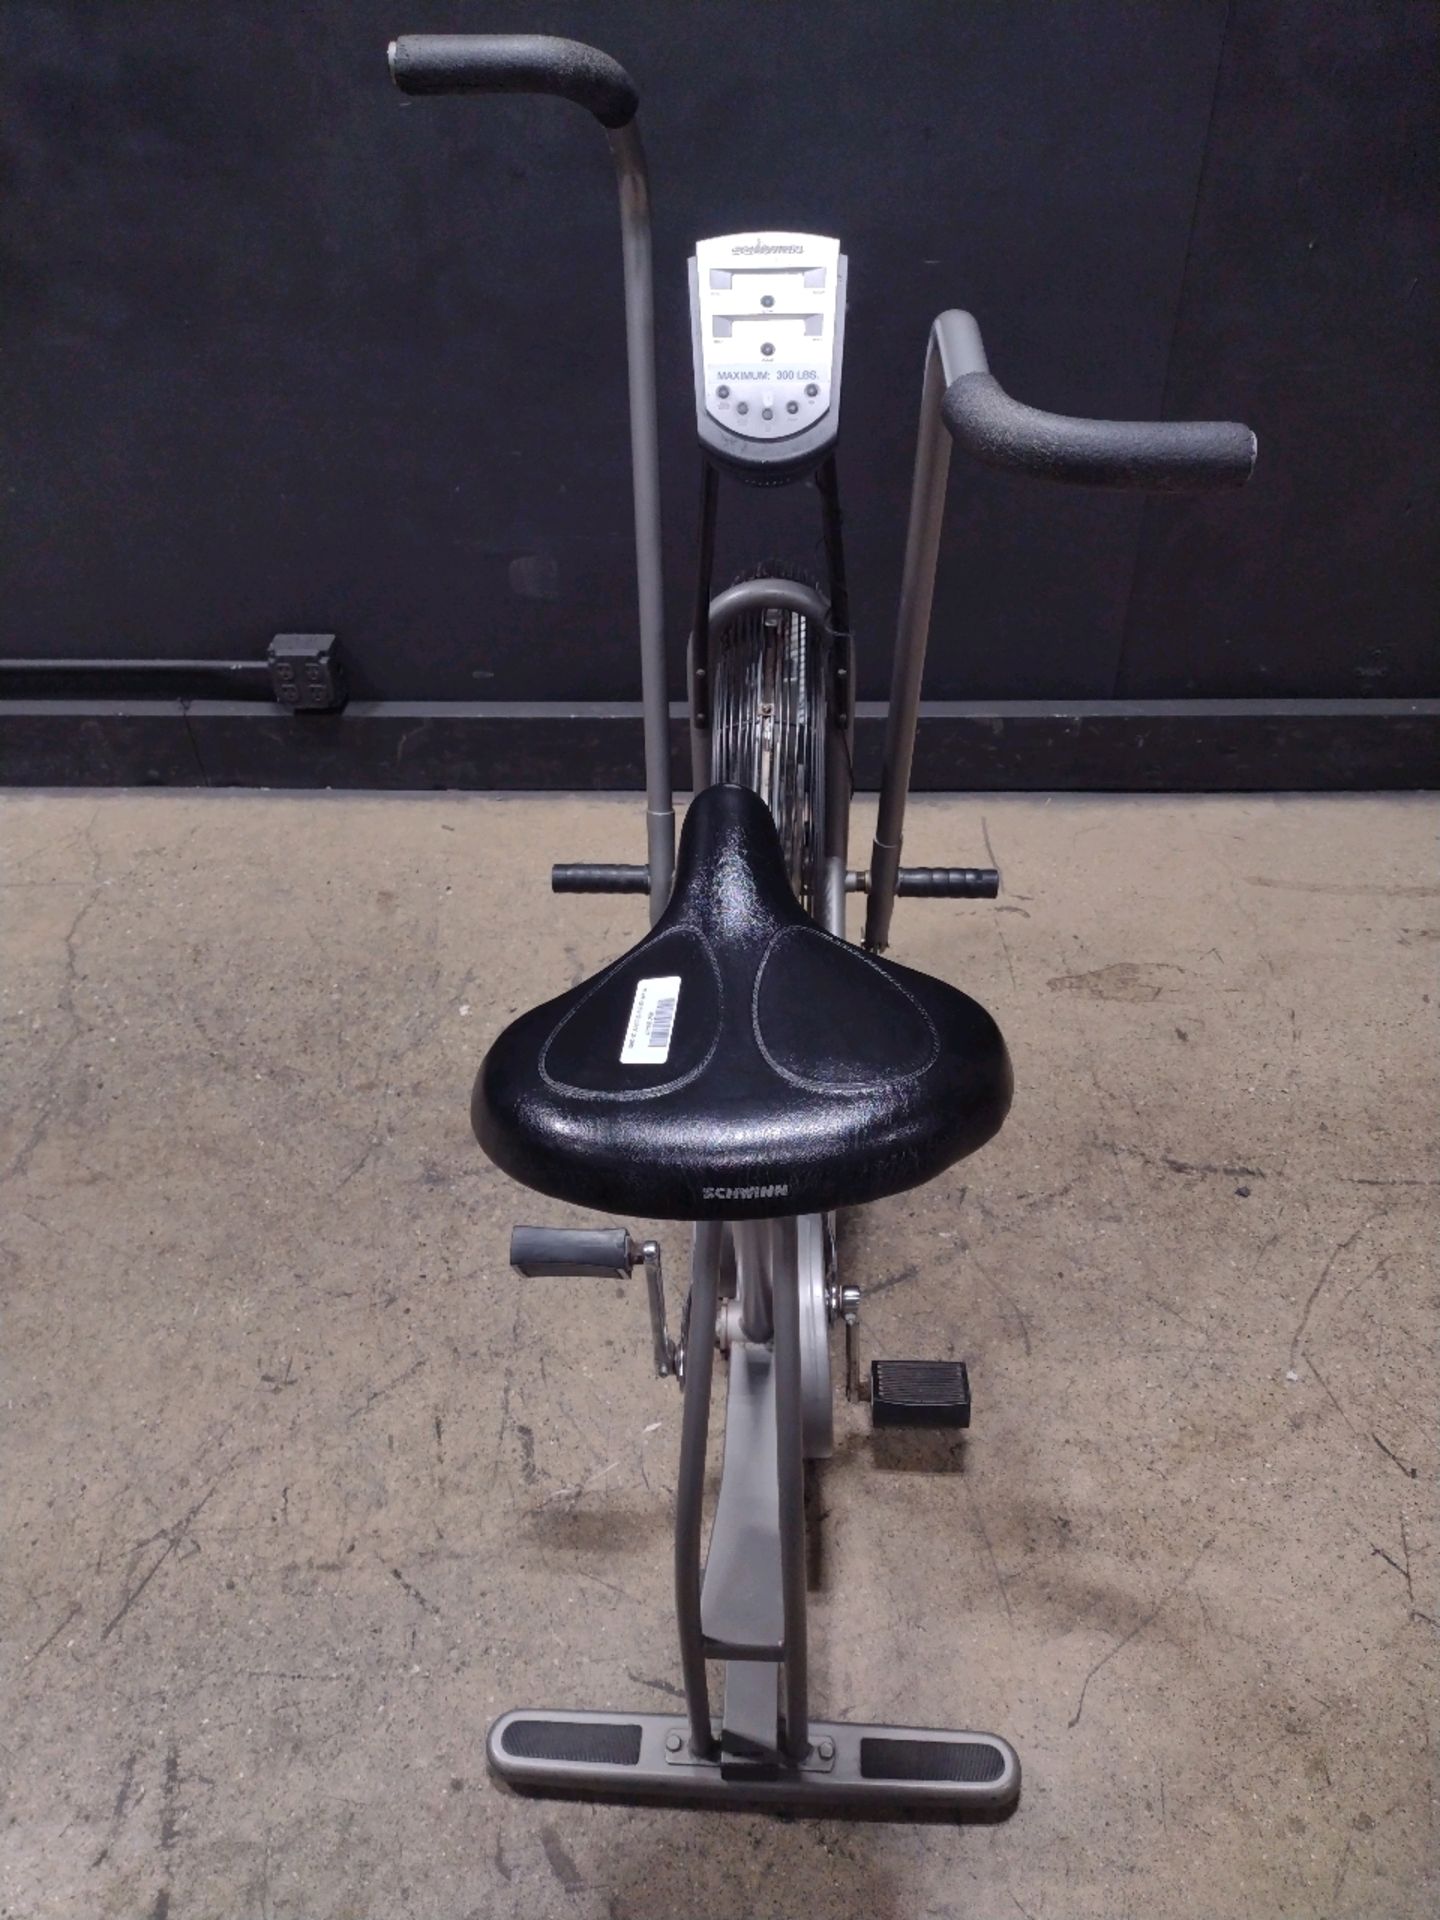 SCHWINN AIRDYNE EXERCISE BIKE (LOCATED AT 3325 MOUNT PROSPECT ROAD, FRANKLIN PARK, IL, 60131) - Image 4 of 4